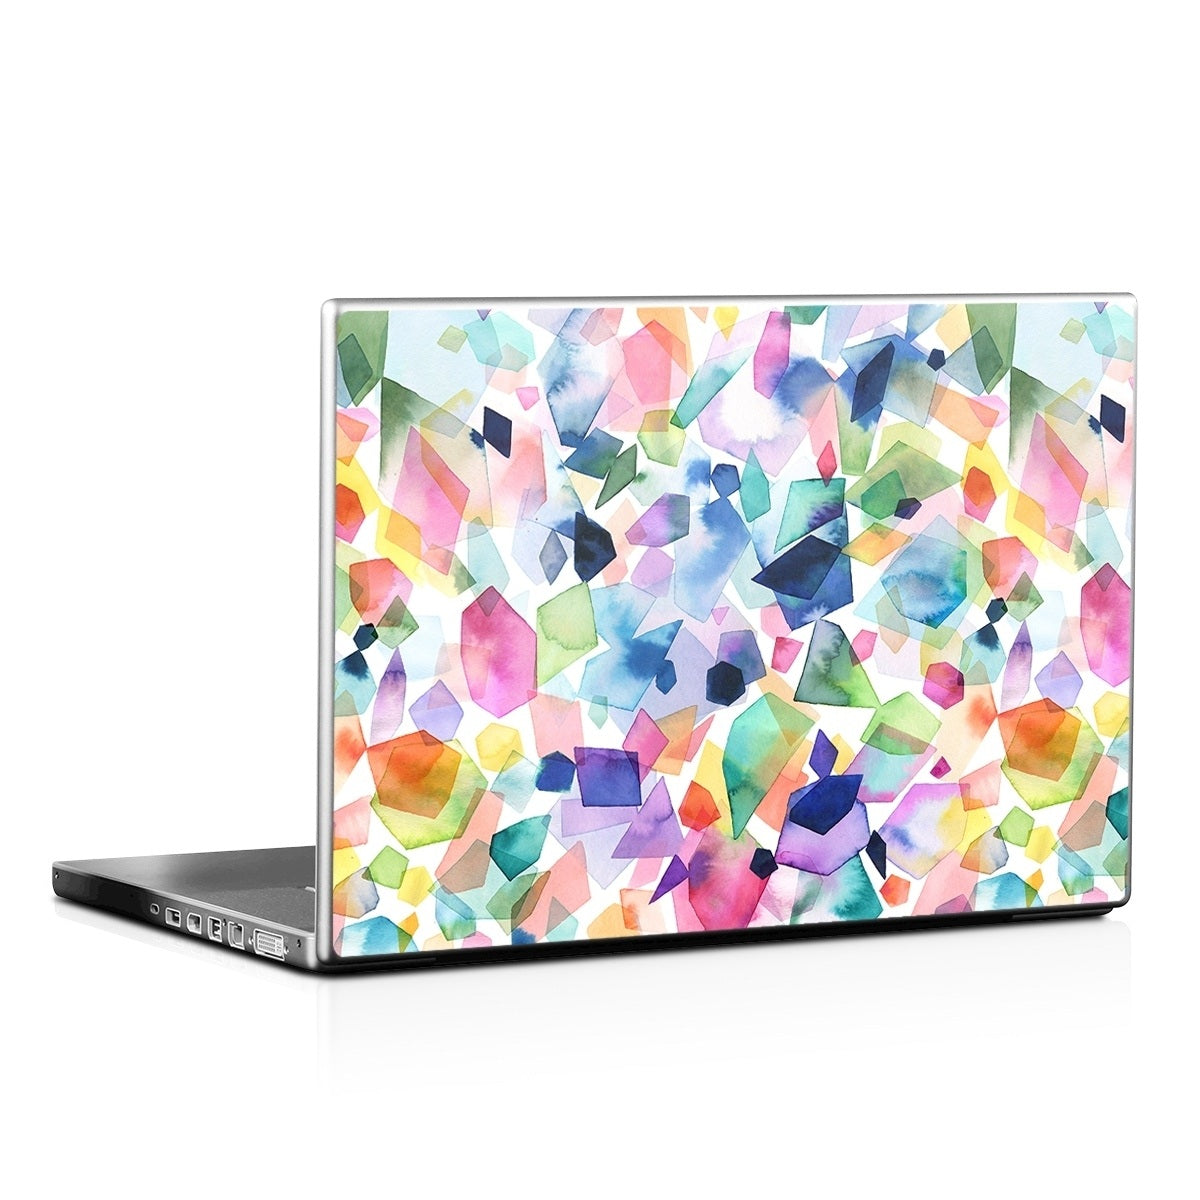 Watercolor Crystals and Gems - Laptop Lid Skin